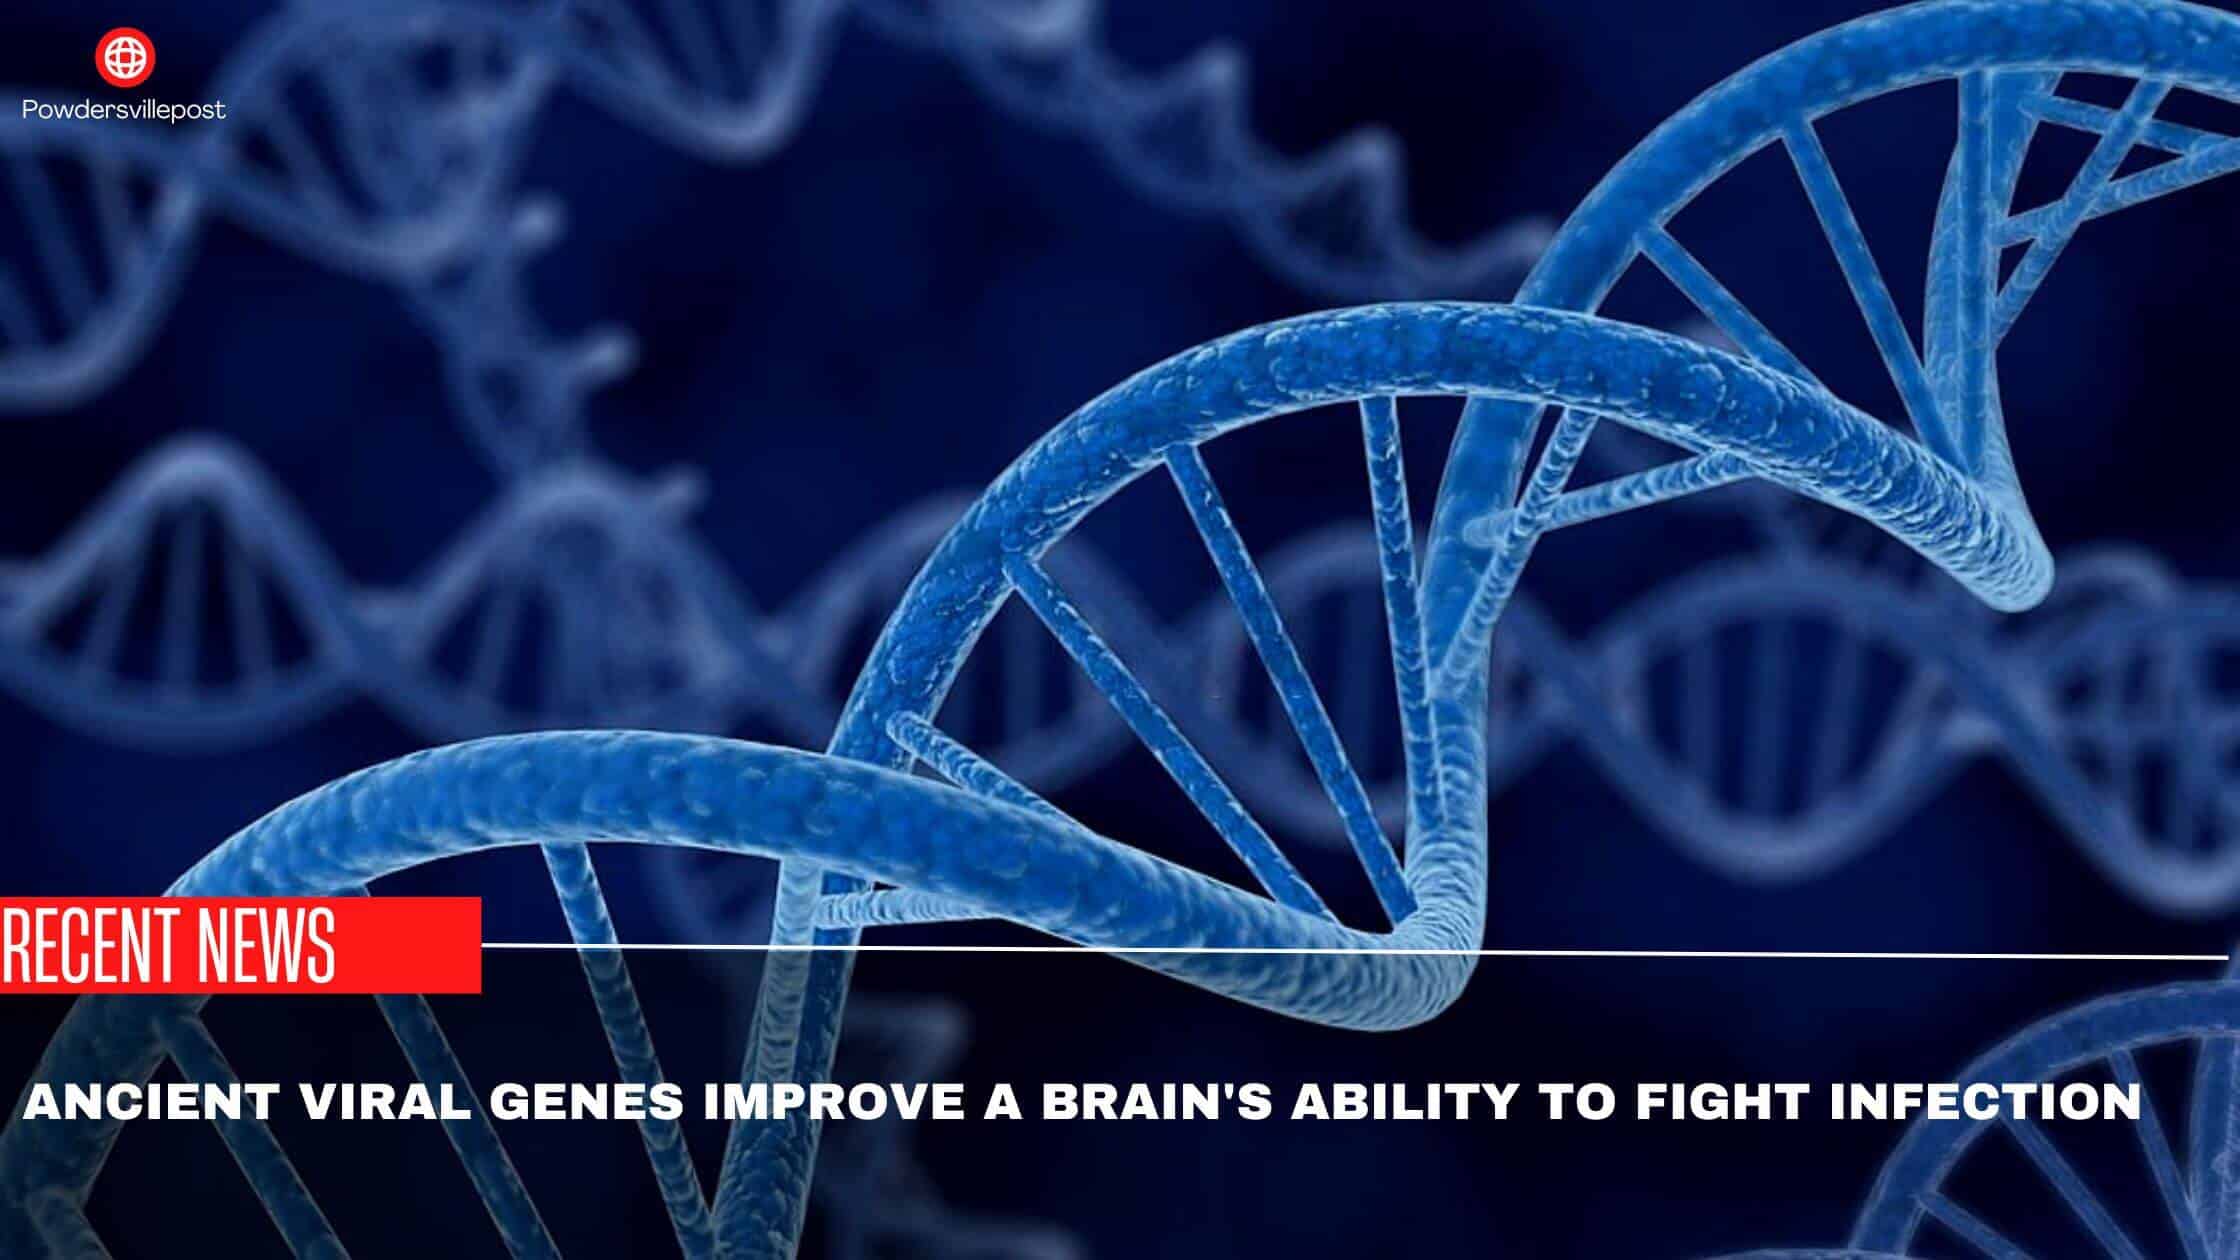 Ancient Viral Genes Improve A Brain's Ability To Fight Infection- Study